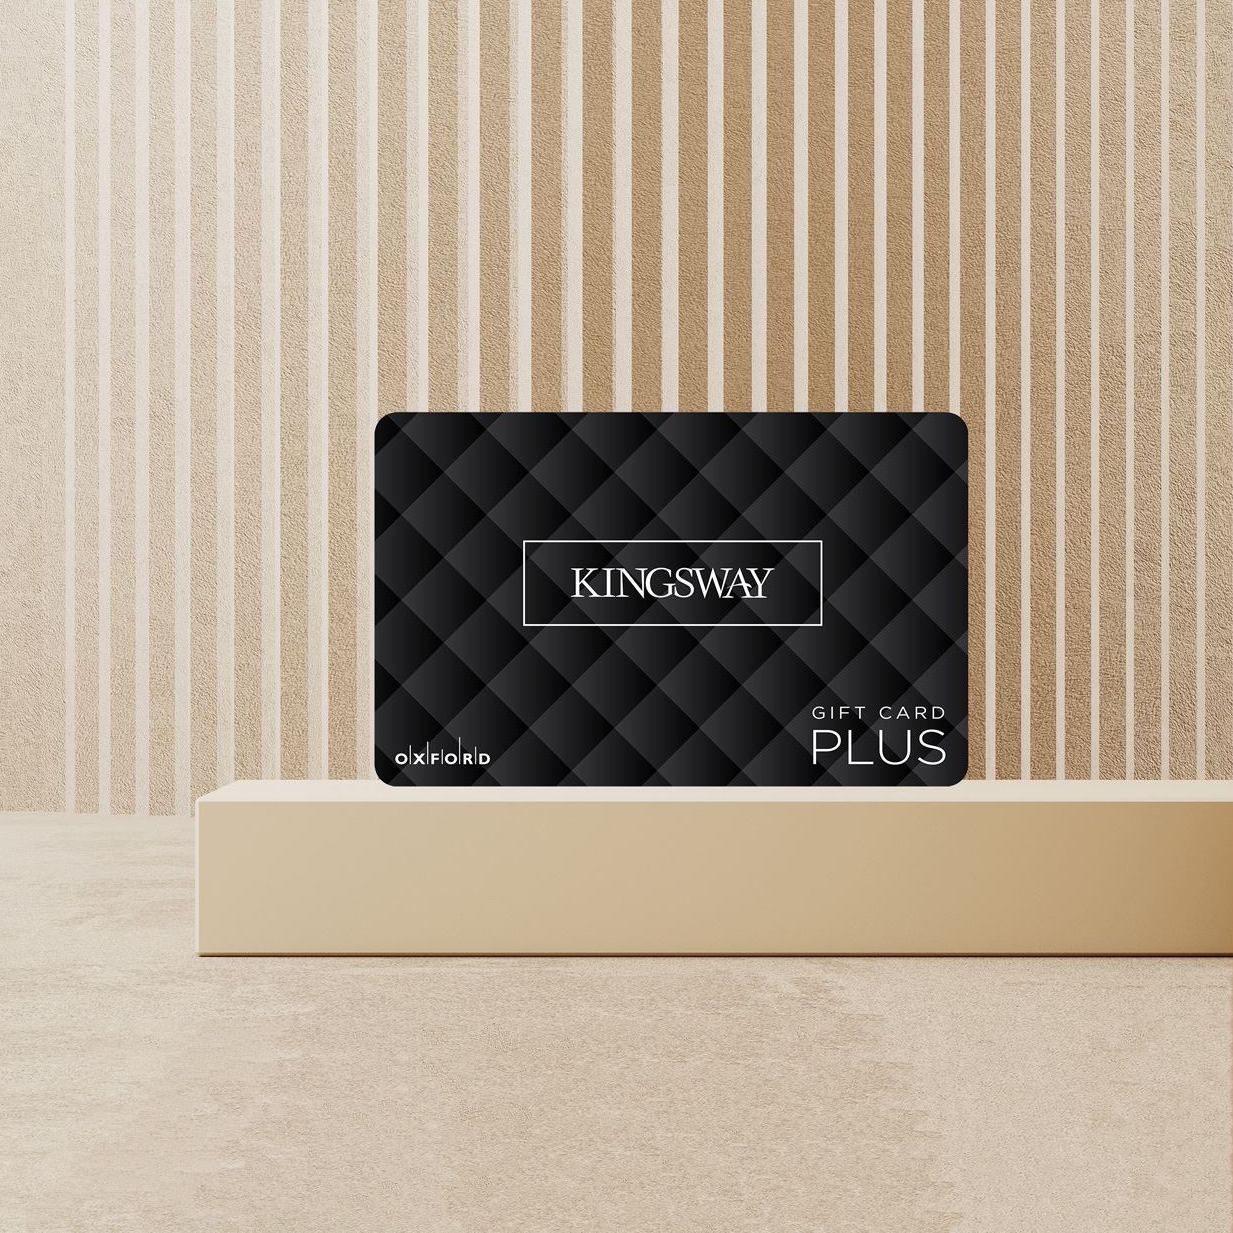 Kingsway gift card against a beige background